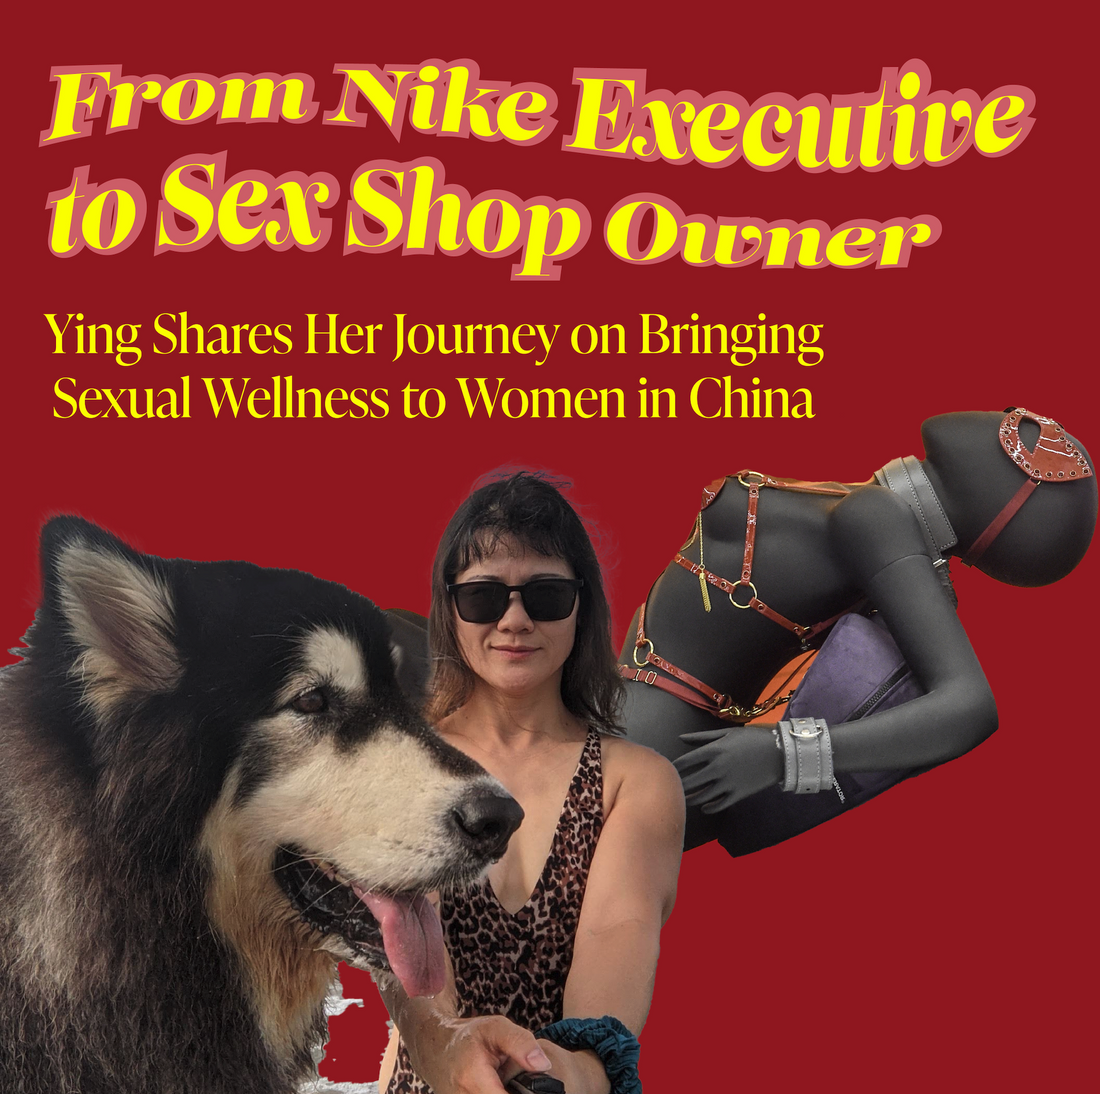 #JustLikeYou | Ying, from McKinsey to Nike Executive to Opening a Sexual Wellness Shop in Shanghai